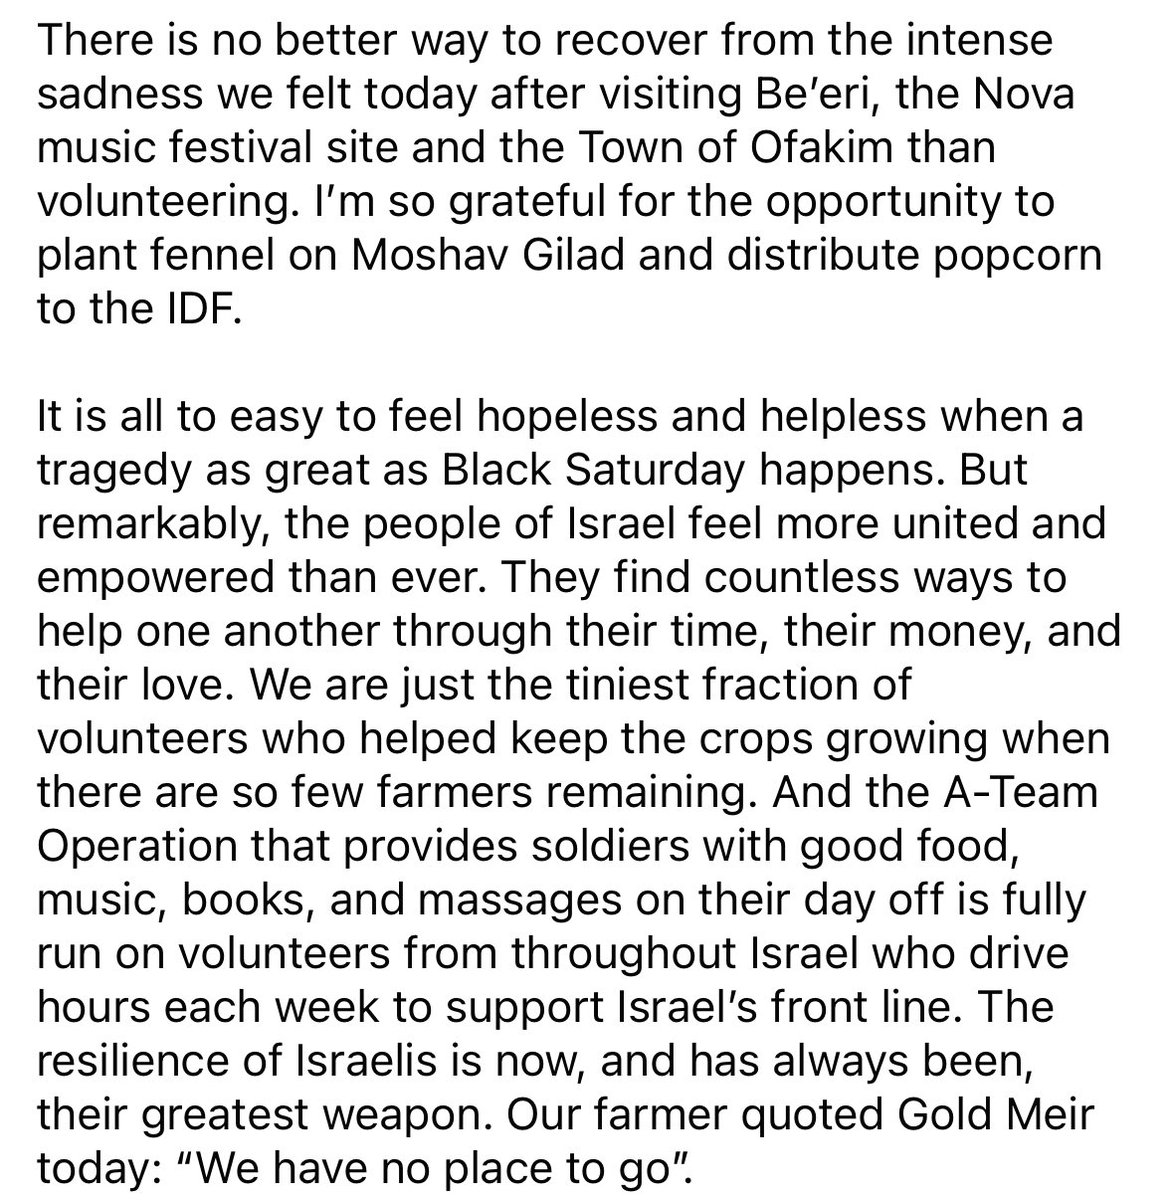 While G@zans starve, American tourists (in this case, from New Jersey) rejoice in Isr@el, watching as IDF soldiers receive “good food, music, books, and massages on their day off.”